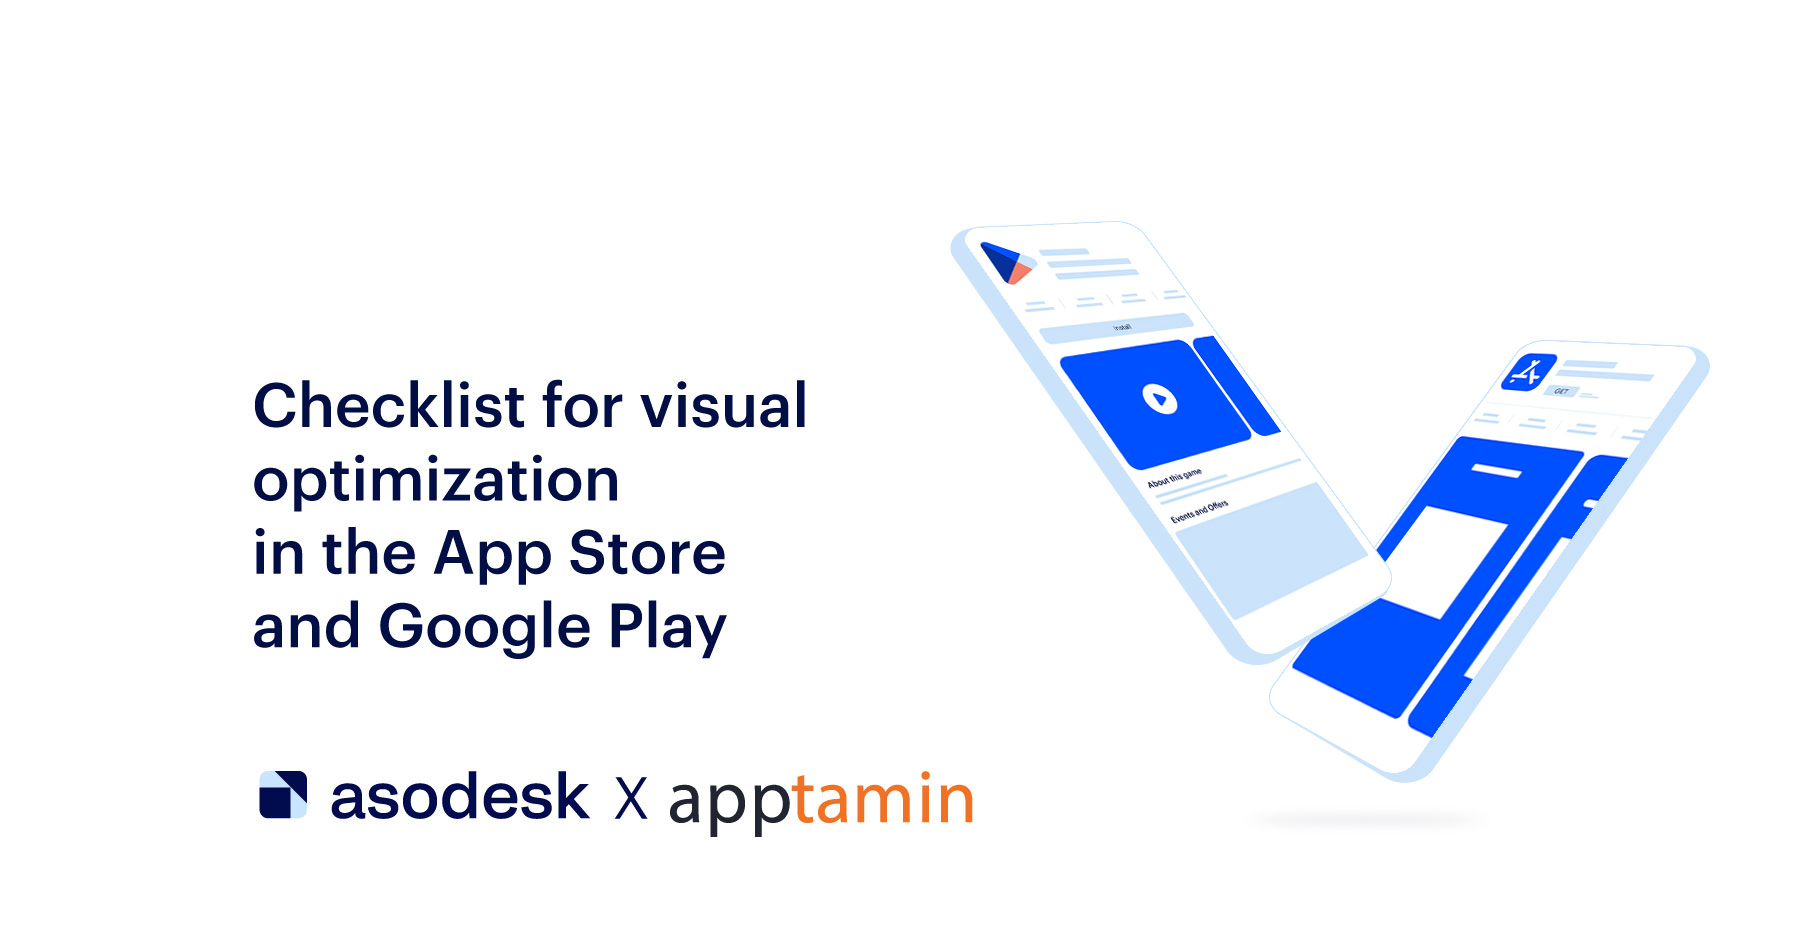 Checklist for visual optimization in the App Store and Google Play